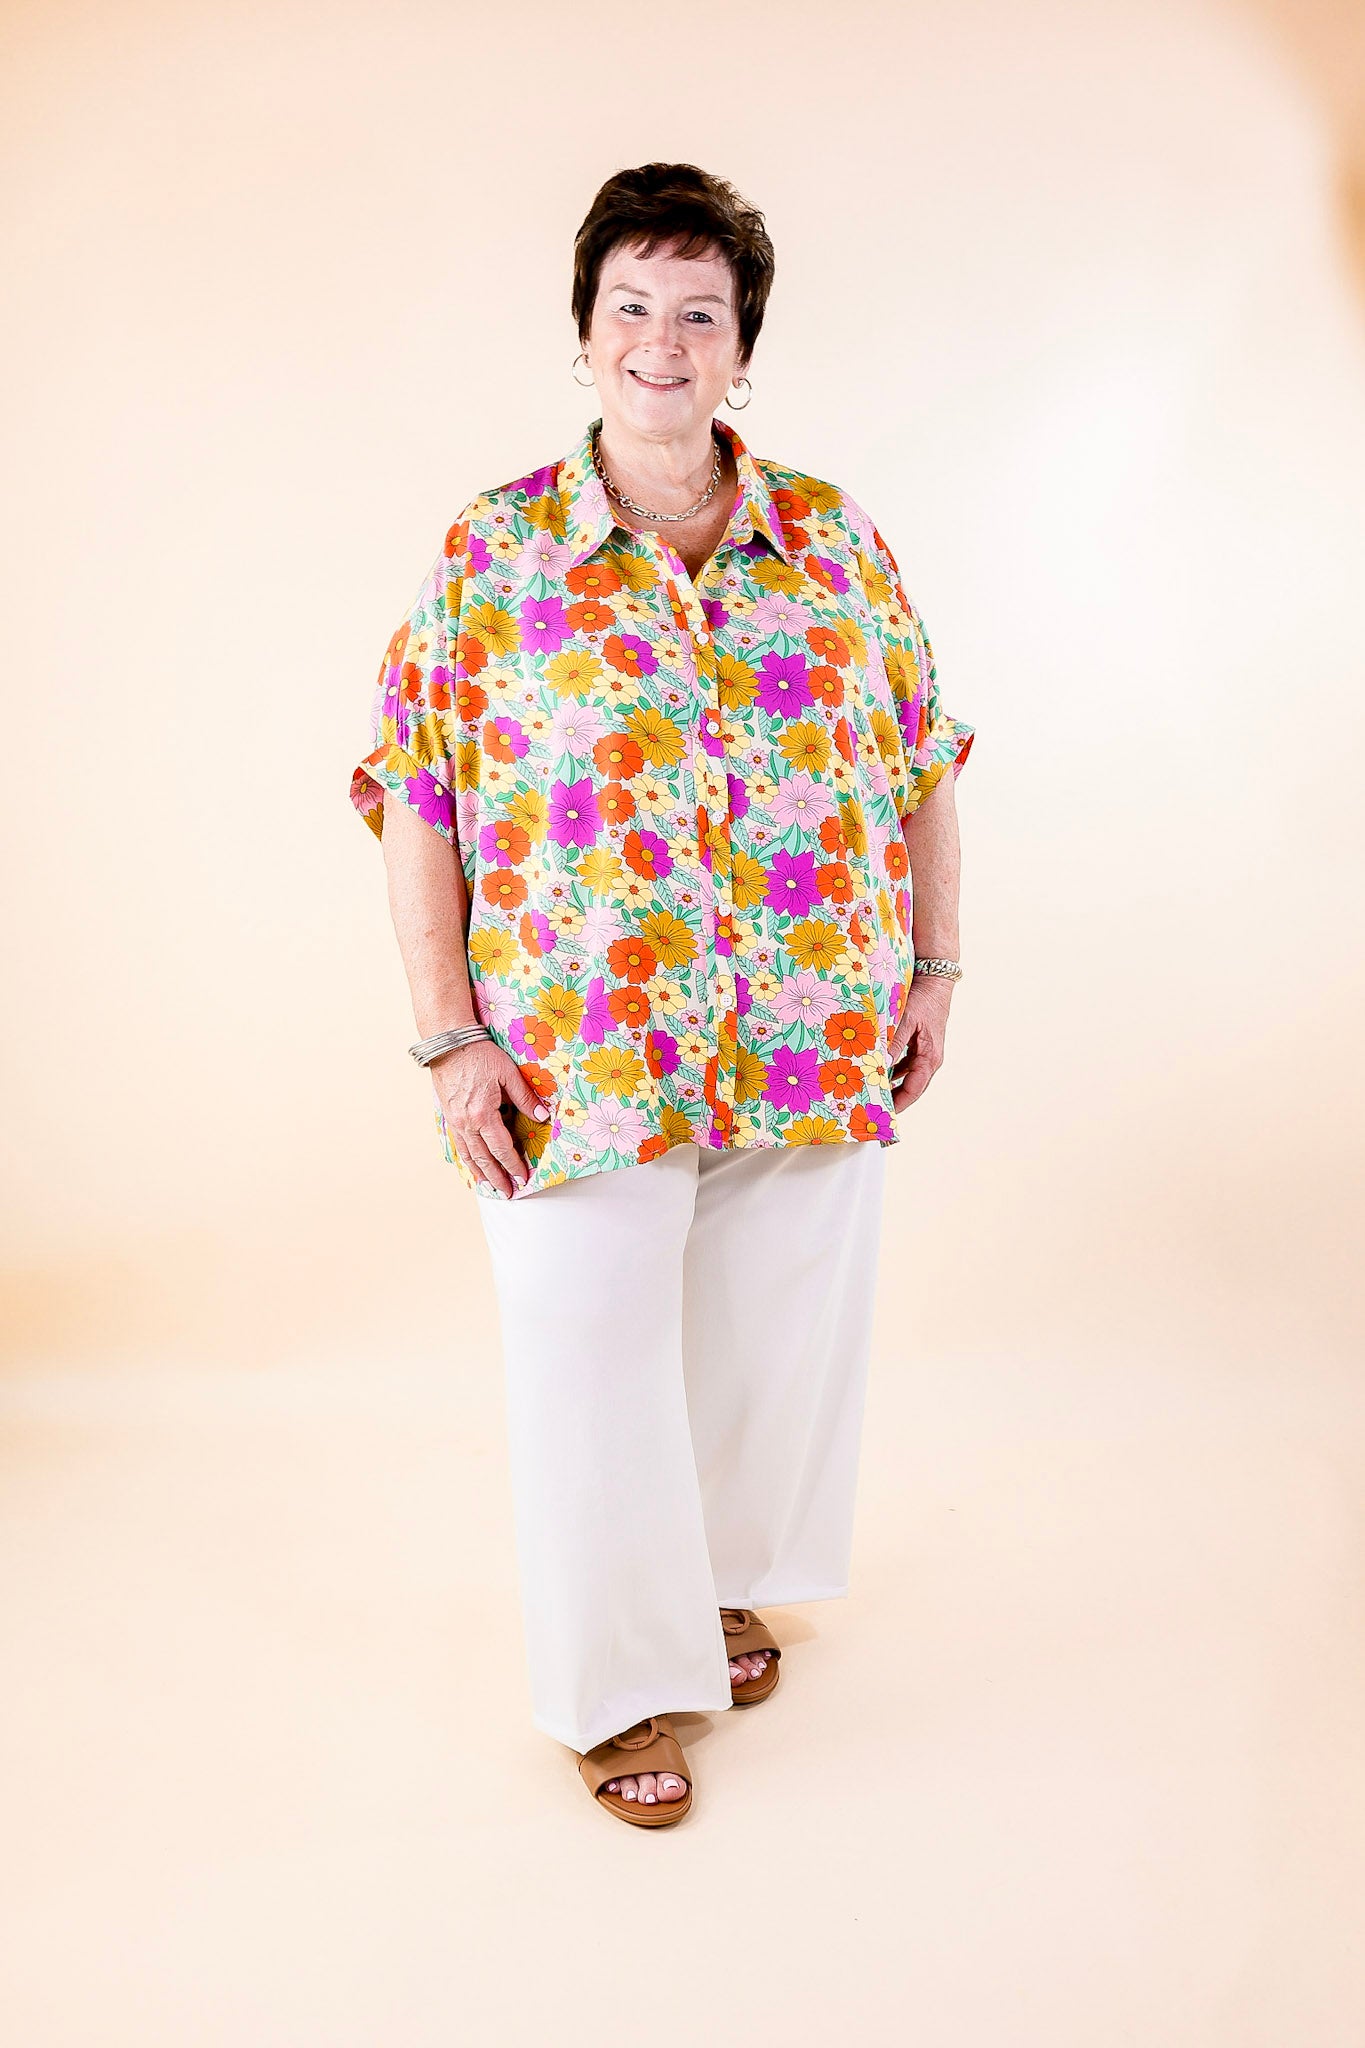 Pretty Days Floral Print Button Up Poncho Top with Short Sleeves in Cream - Giddy Up Glamour Boutique